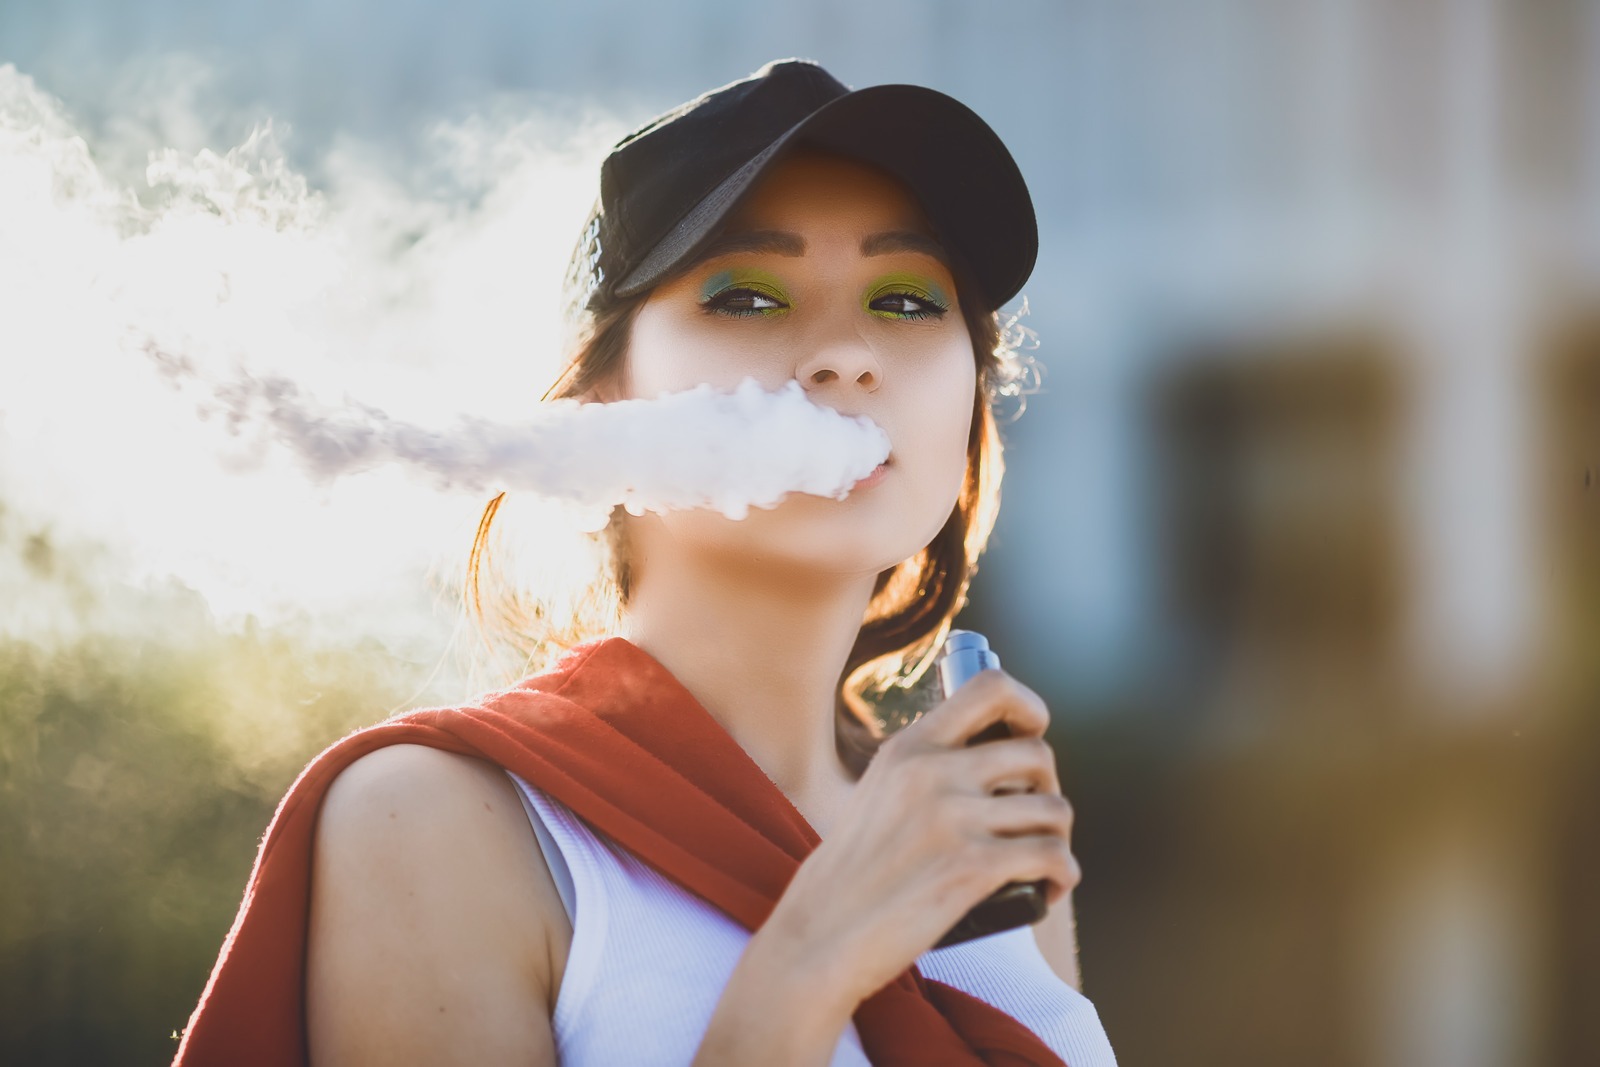 What is Sub Ohm Vaping?